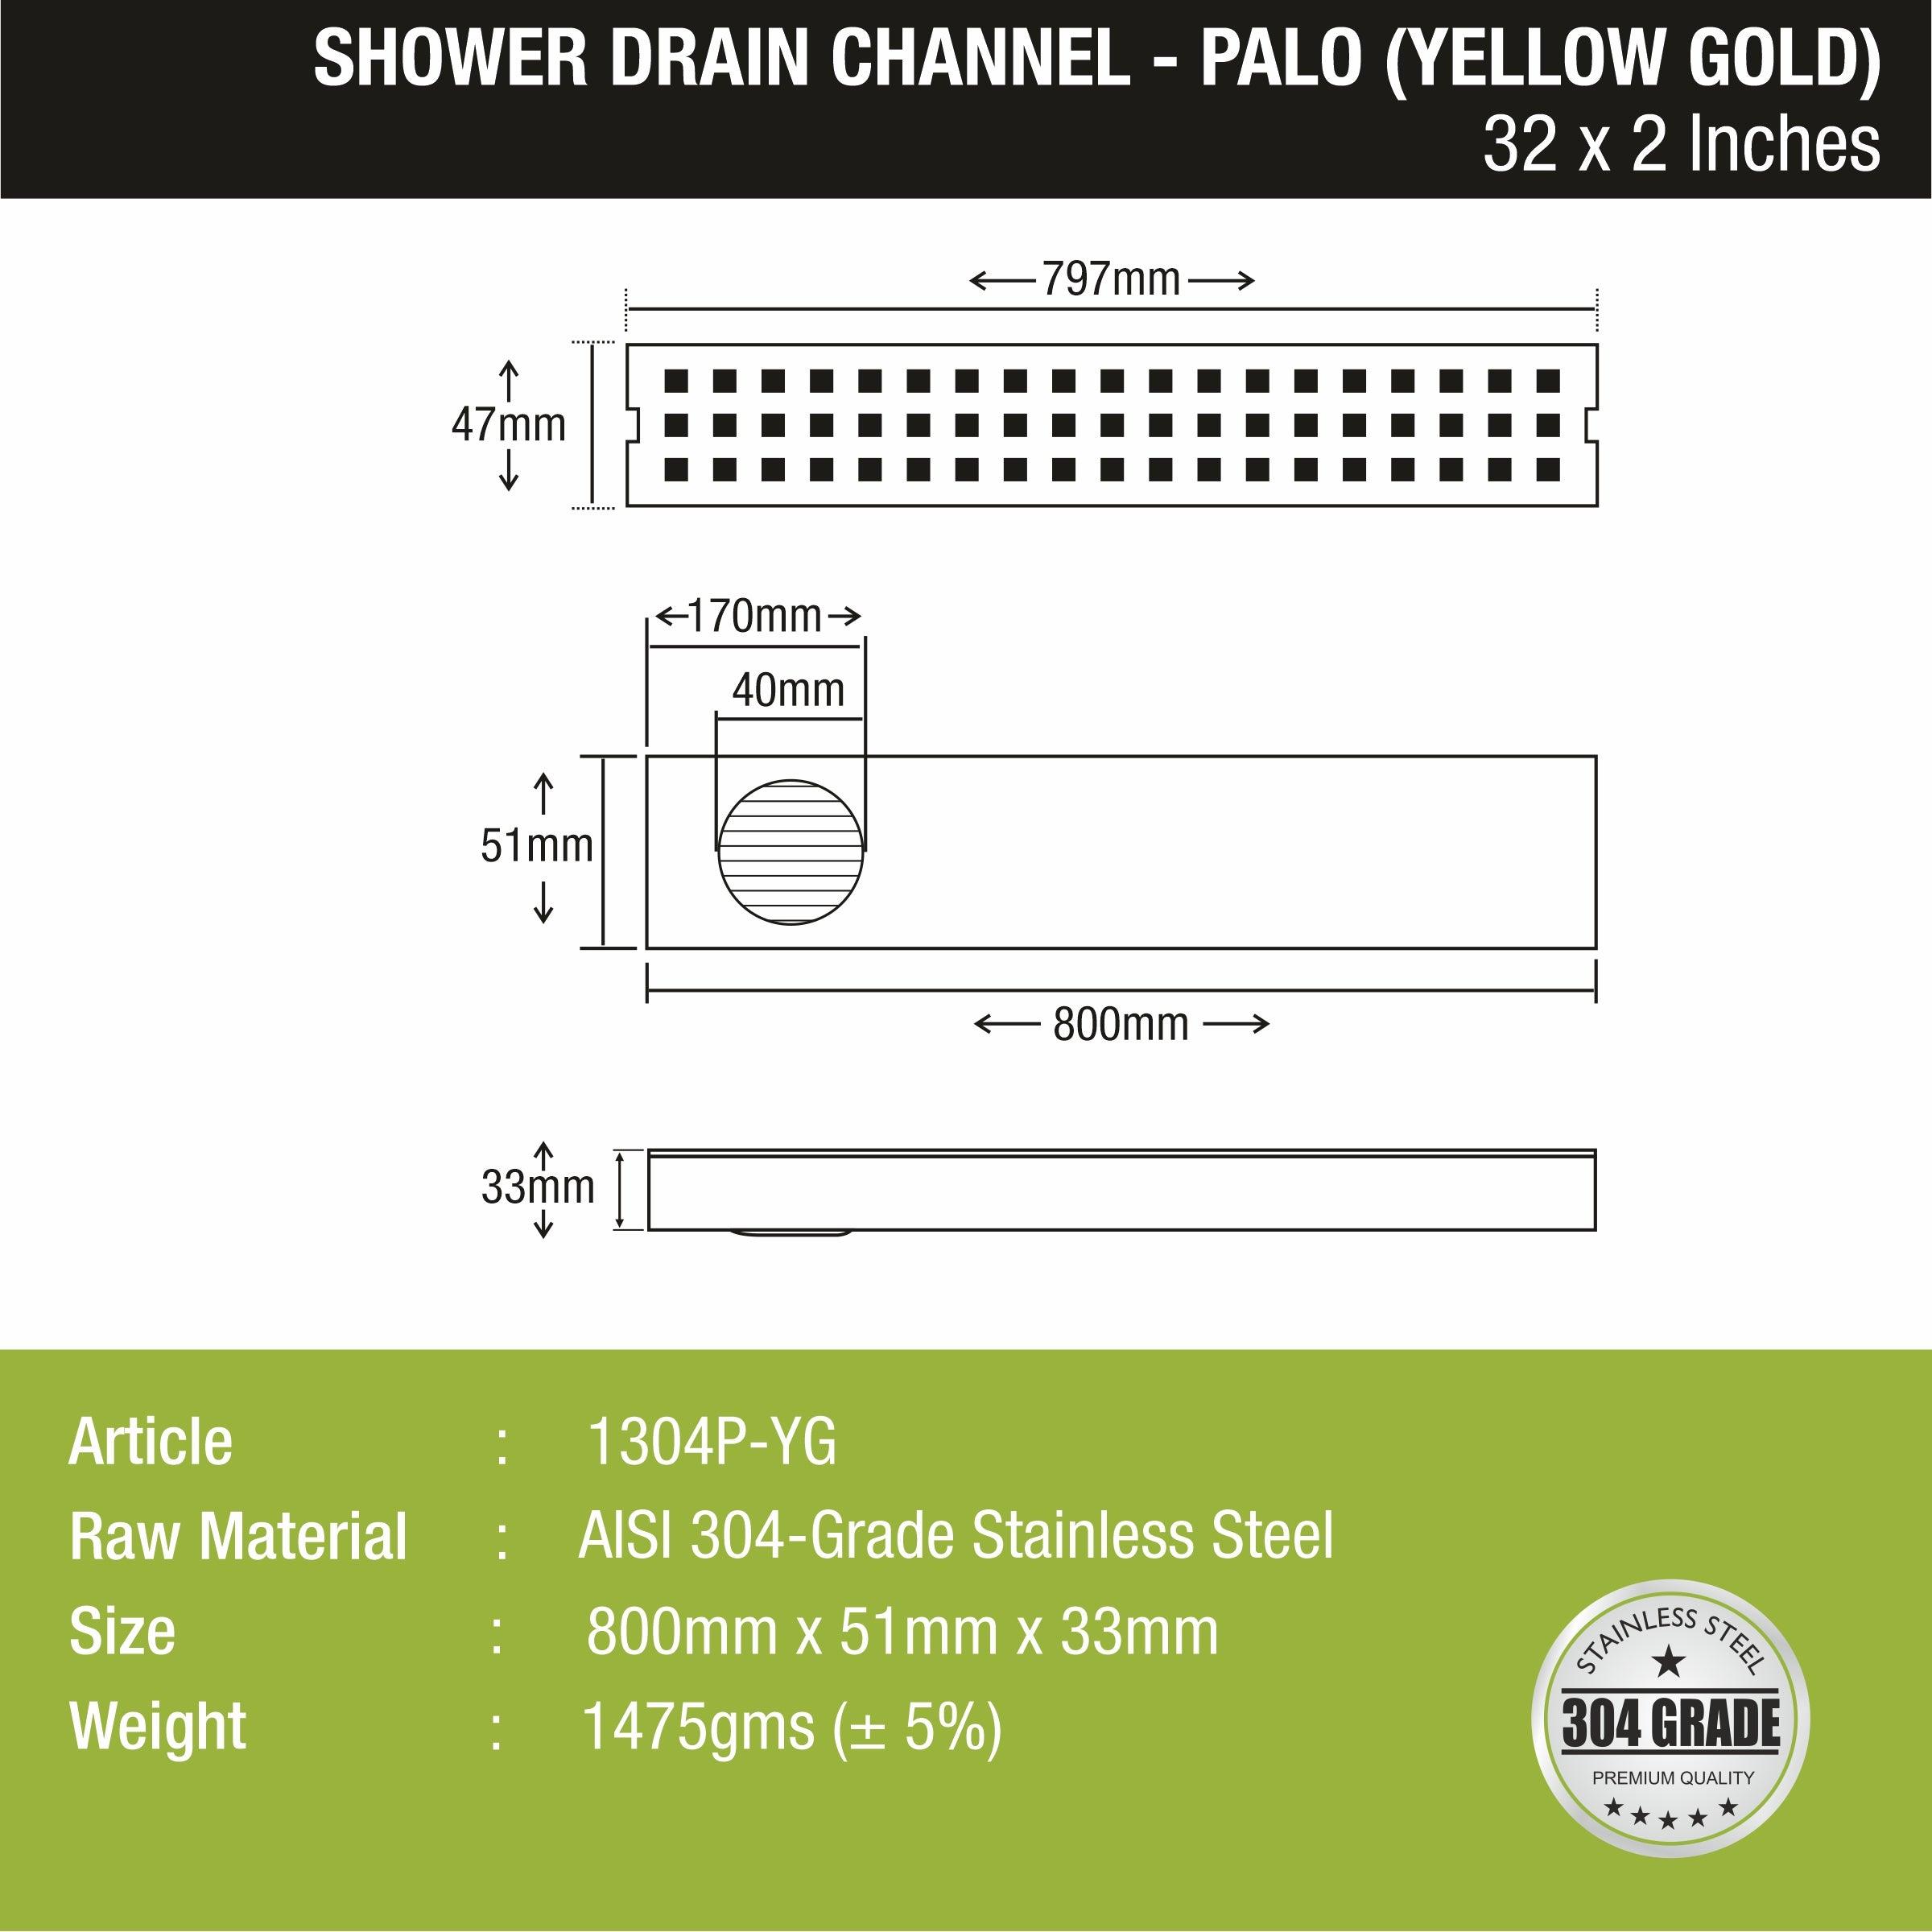 Palo Shower Drain Channel - Yellow Gold (32 x 2 Inches) sizes and dimensions